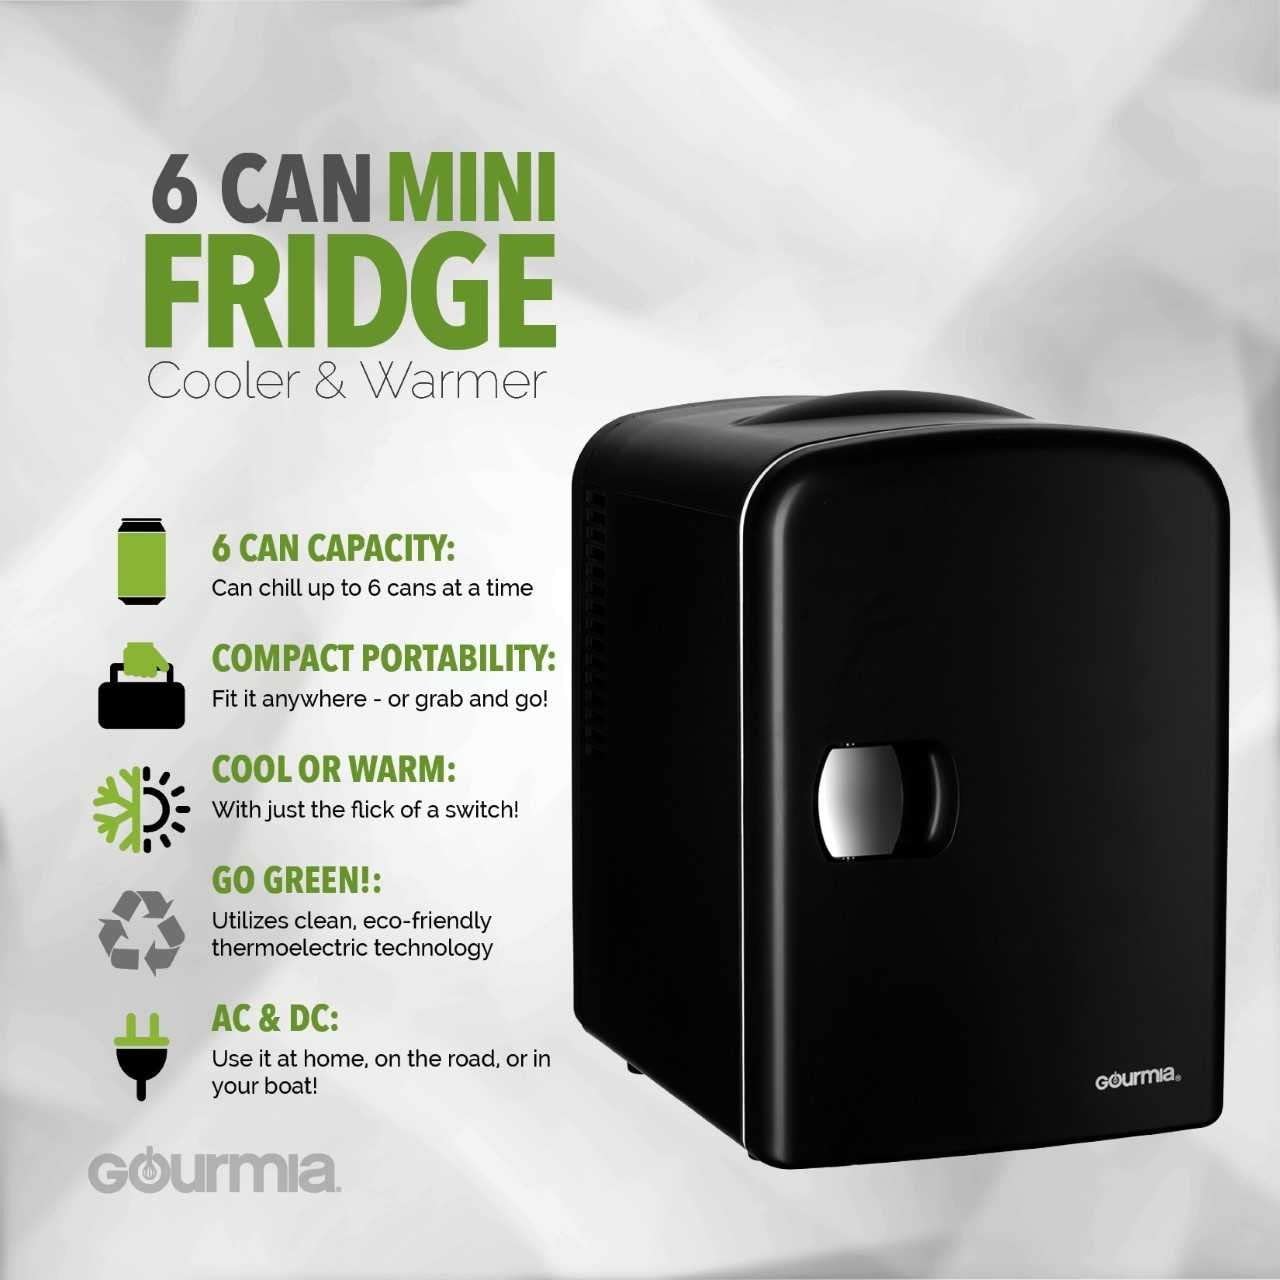 Mini Refrigerators, Gourmia GMF600 Portable 6 Can Mini Fridge Cooler and  Warmer for Home ,Office, Car or Boat AC & DC